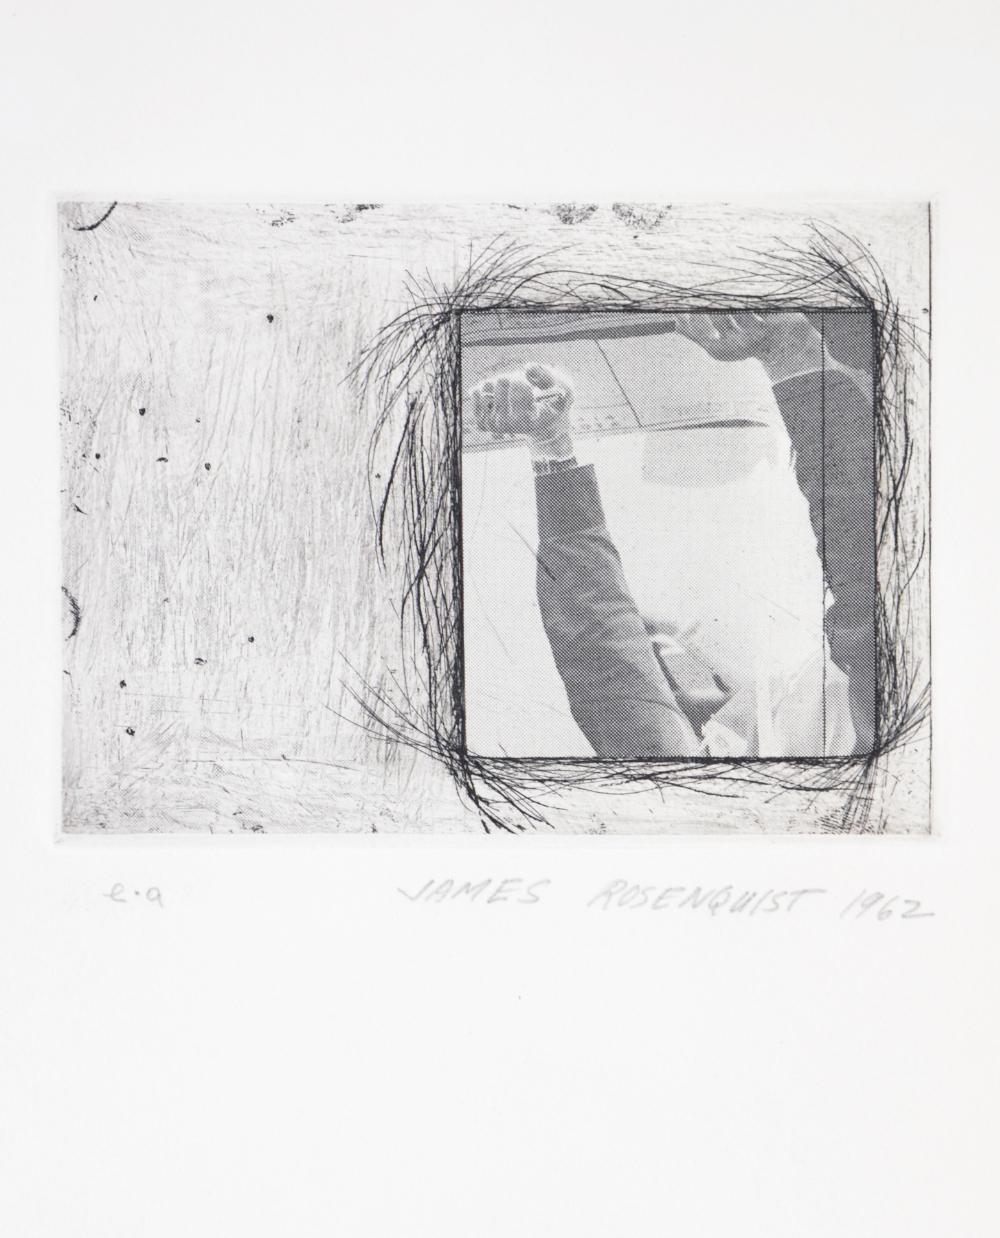 James Rosenquist Figurative Print - Certificate, from The International Anthology of Contemporary Engraving